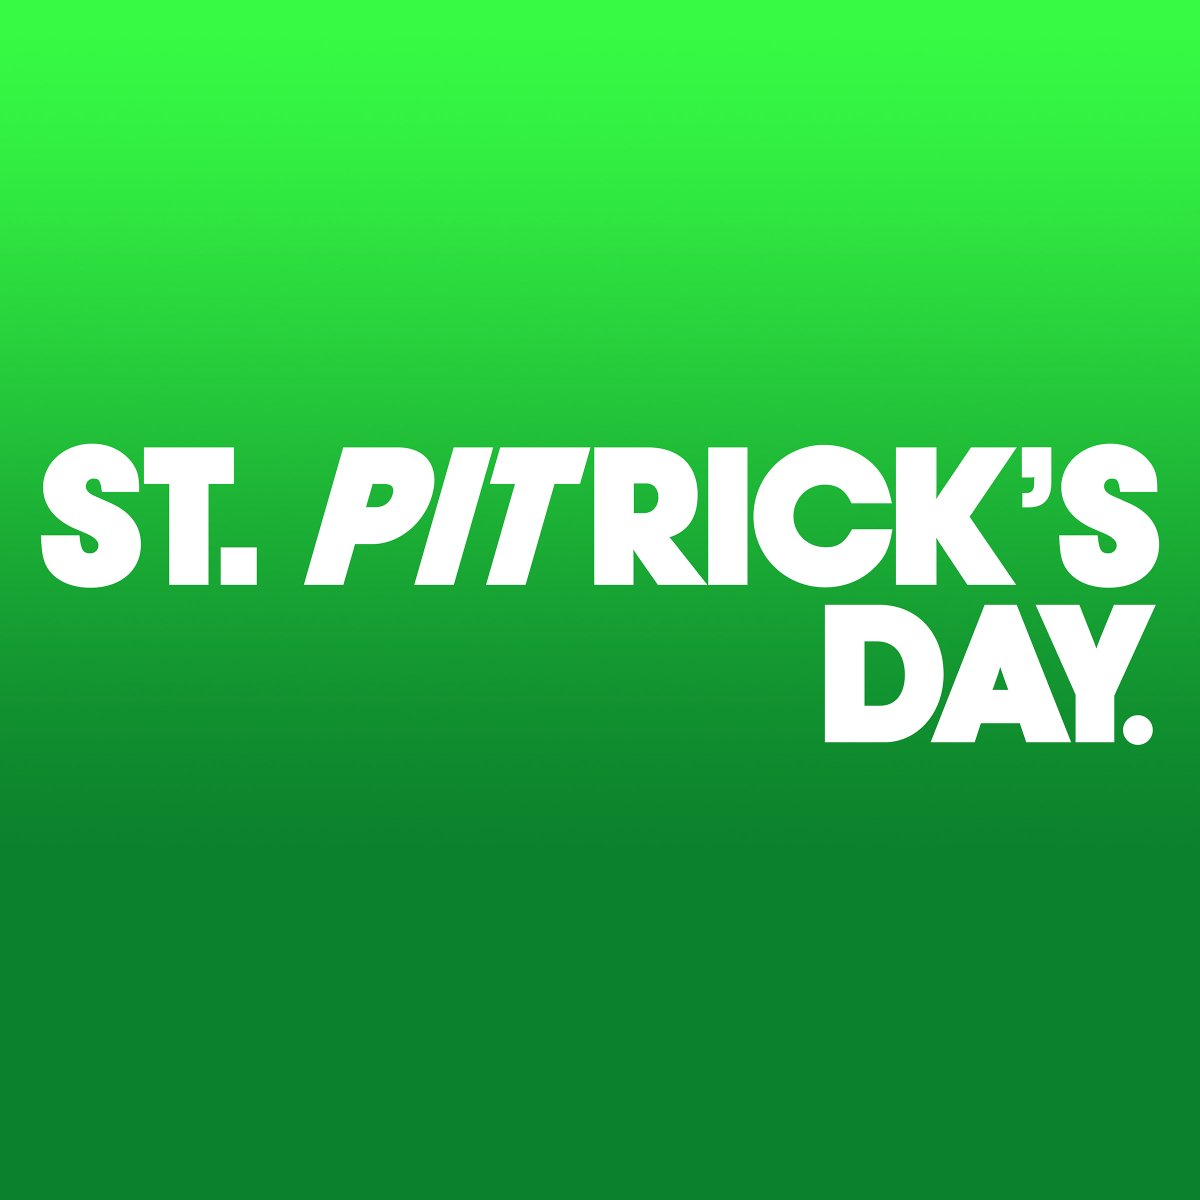 Channel the luck of the 305 and have yourself a happy, safe and unforgettable St. PITrick's Day! Dale! ???? ???? https://t.co/KPcfLjIas2